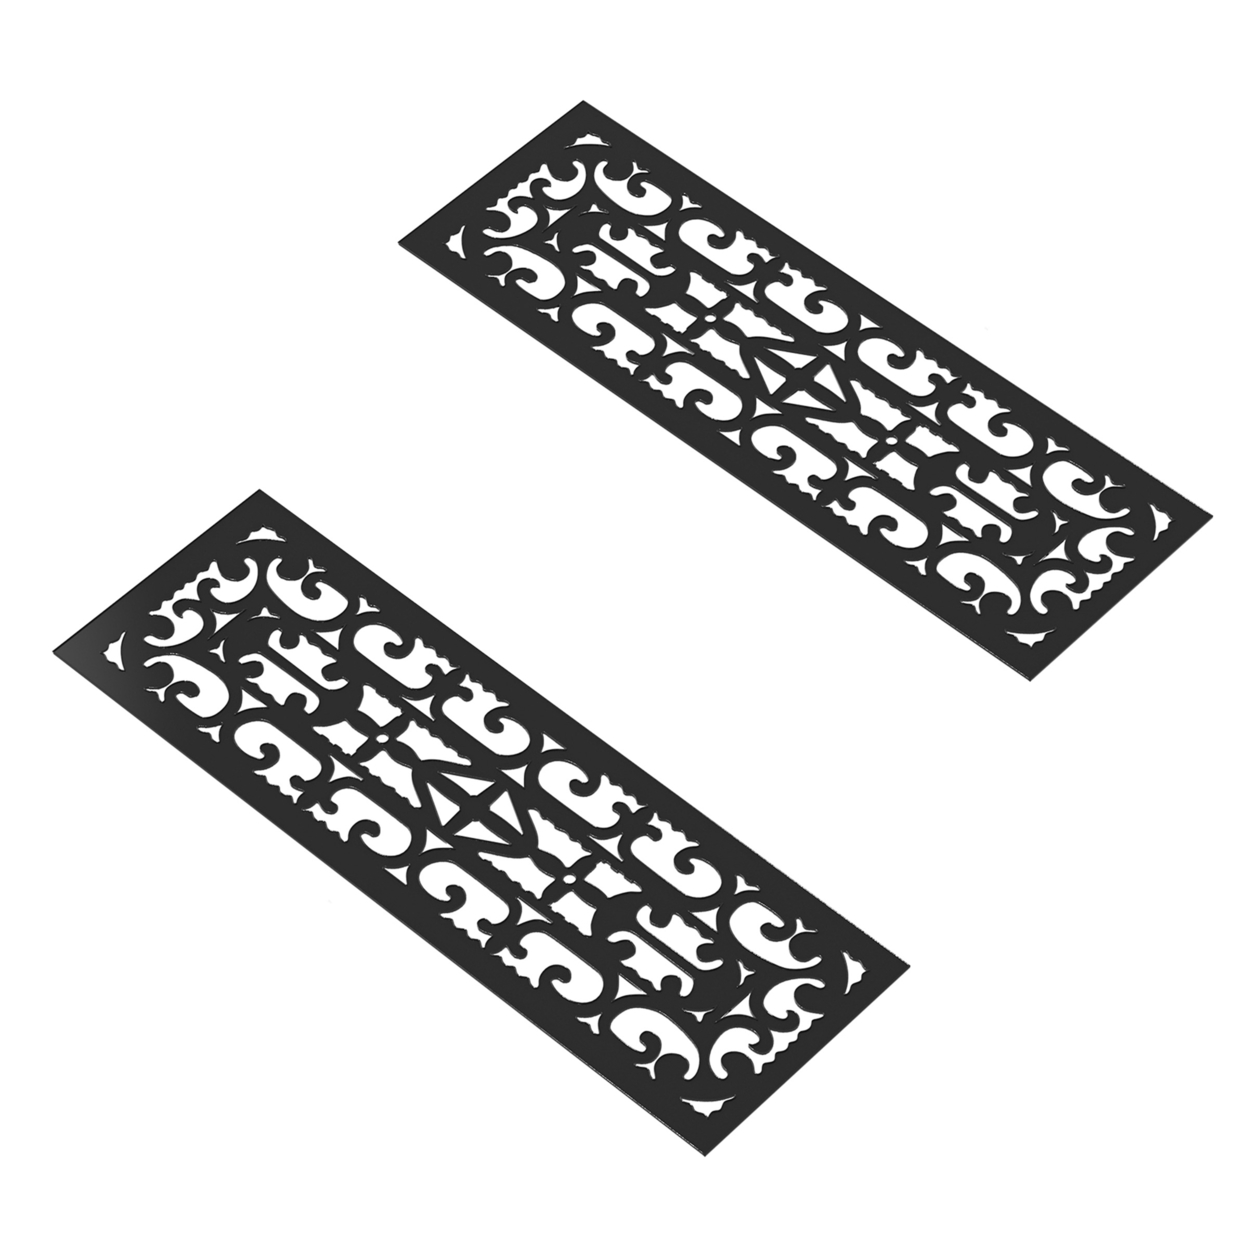 Pure Garden Non-Slip Stair Mats with Traction Control Grip- Heavy Duty Rubber Tread, Ornate Design For Indoor/Outdoor Use, Set of 2 Black